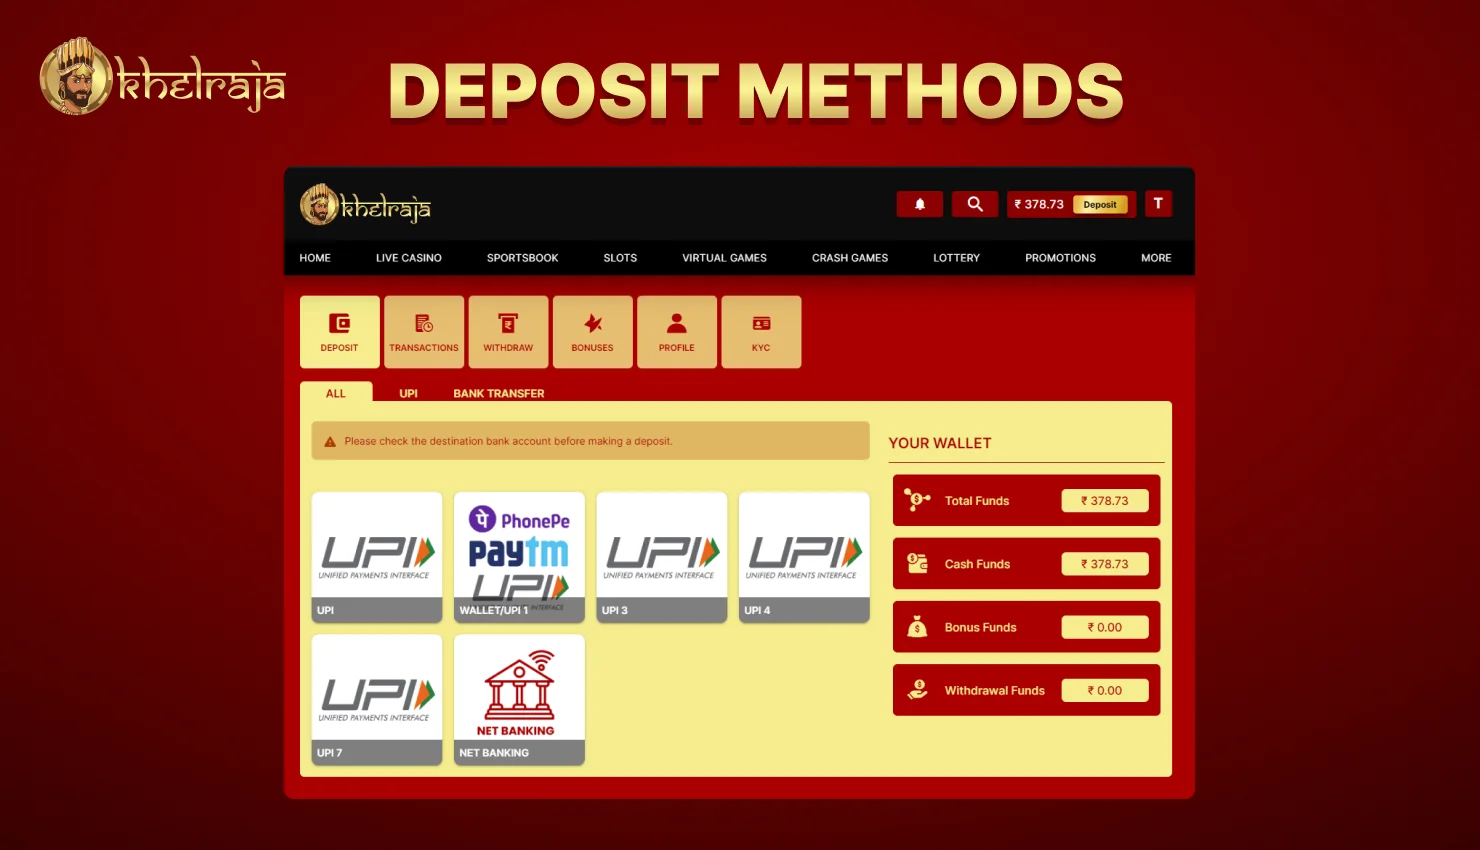 Deposit Page to display the methods of payments